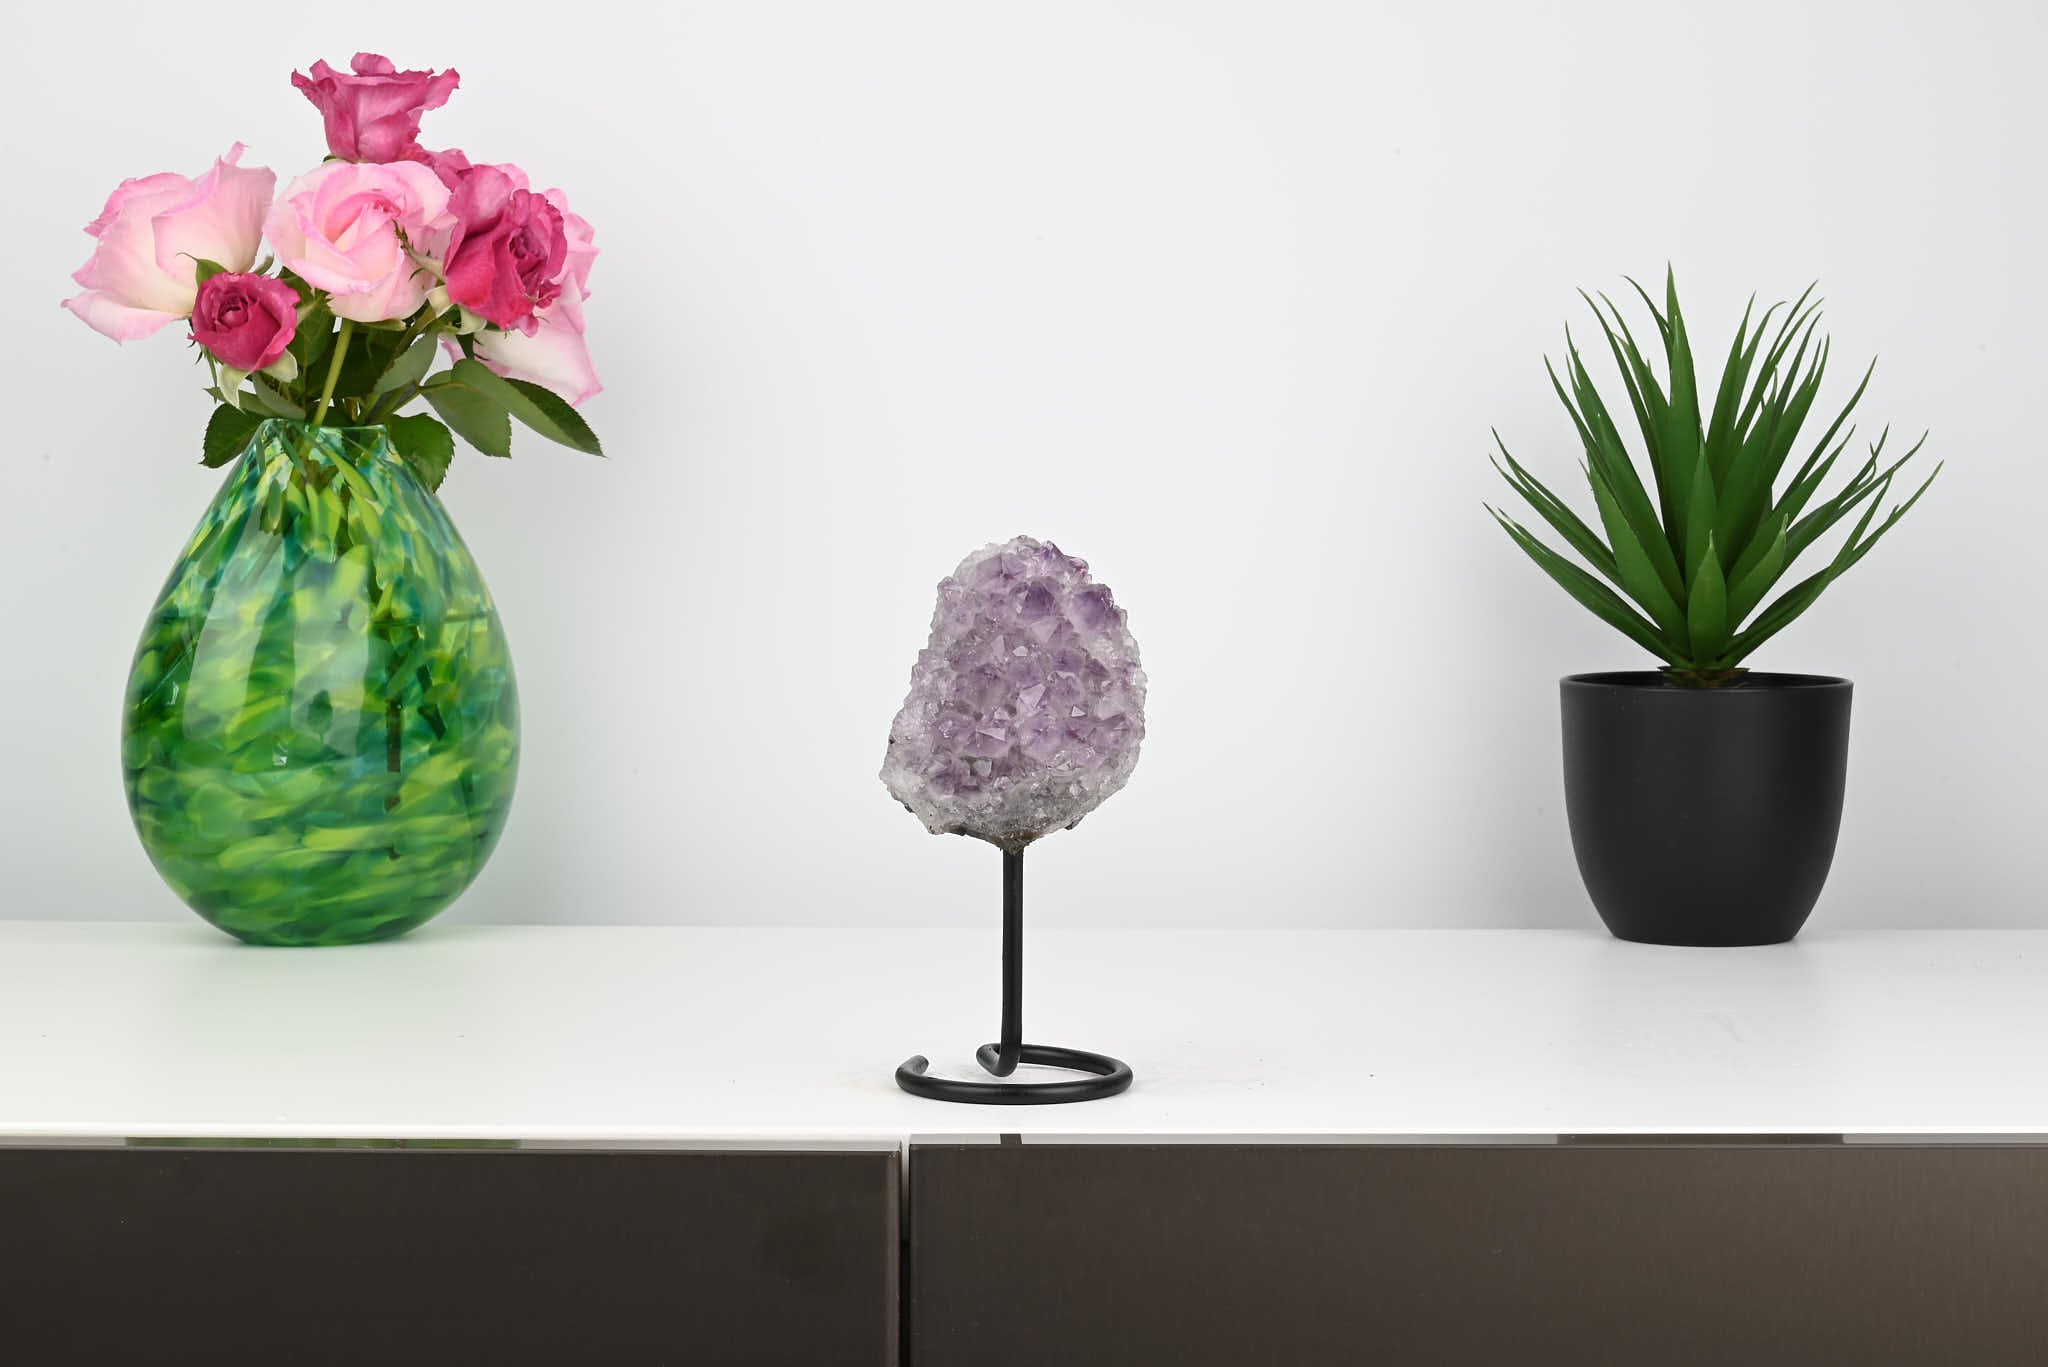 Amethyst Cluster on Stand - Small 15cm Tall - #CLUSAM-63031